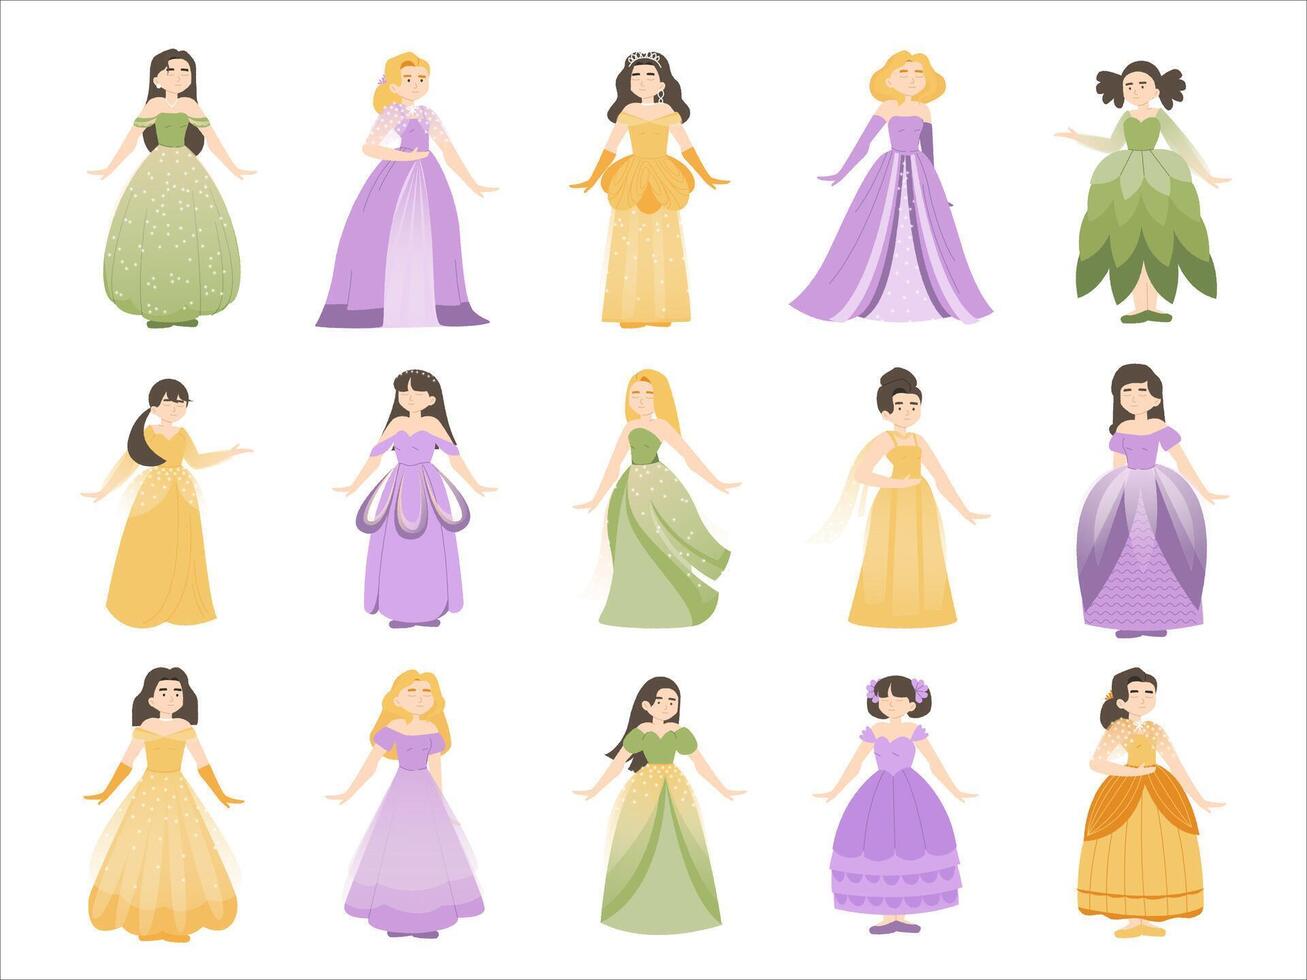 Cute princess character. Cartoon fairy tale medieval girls with different hair style and dress up costume, fantasy royalty. Vector isolated set